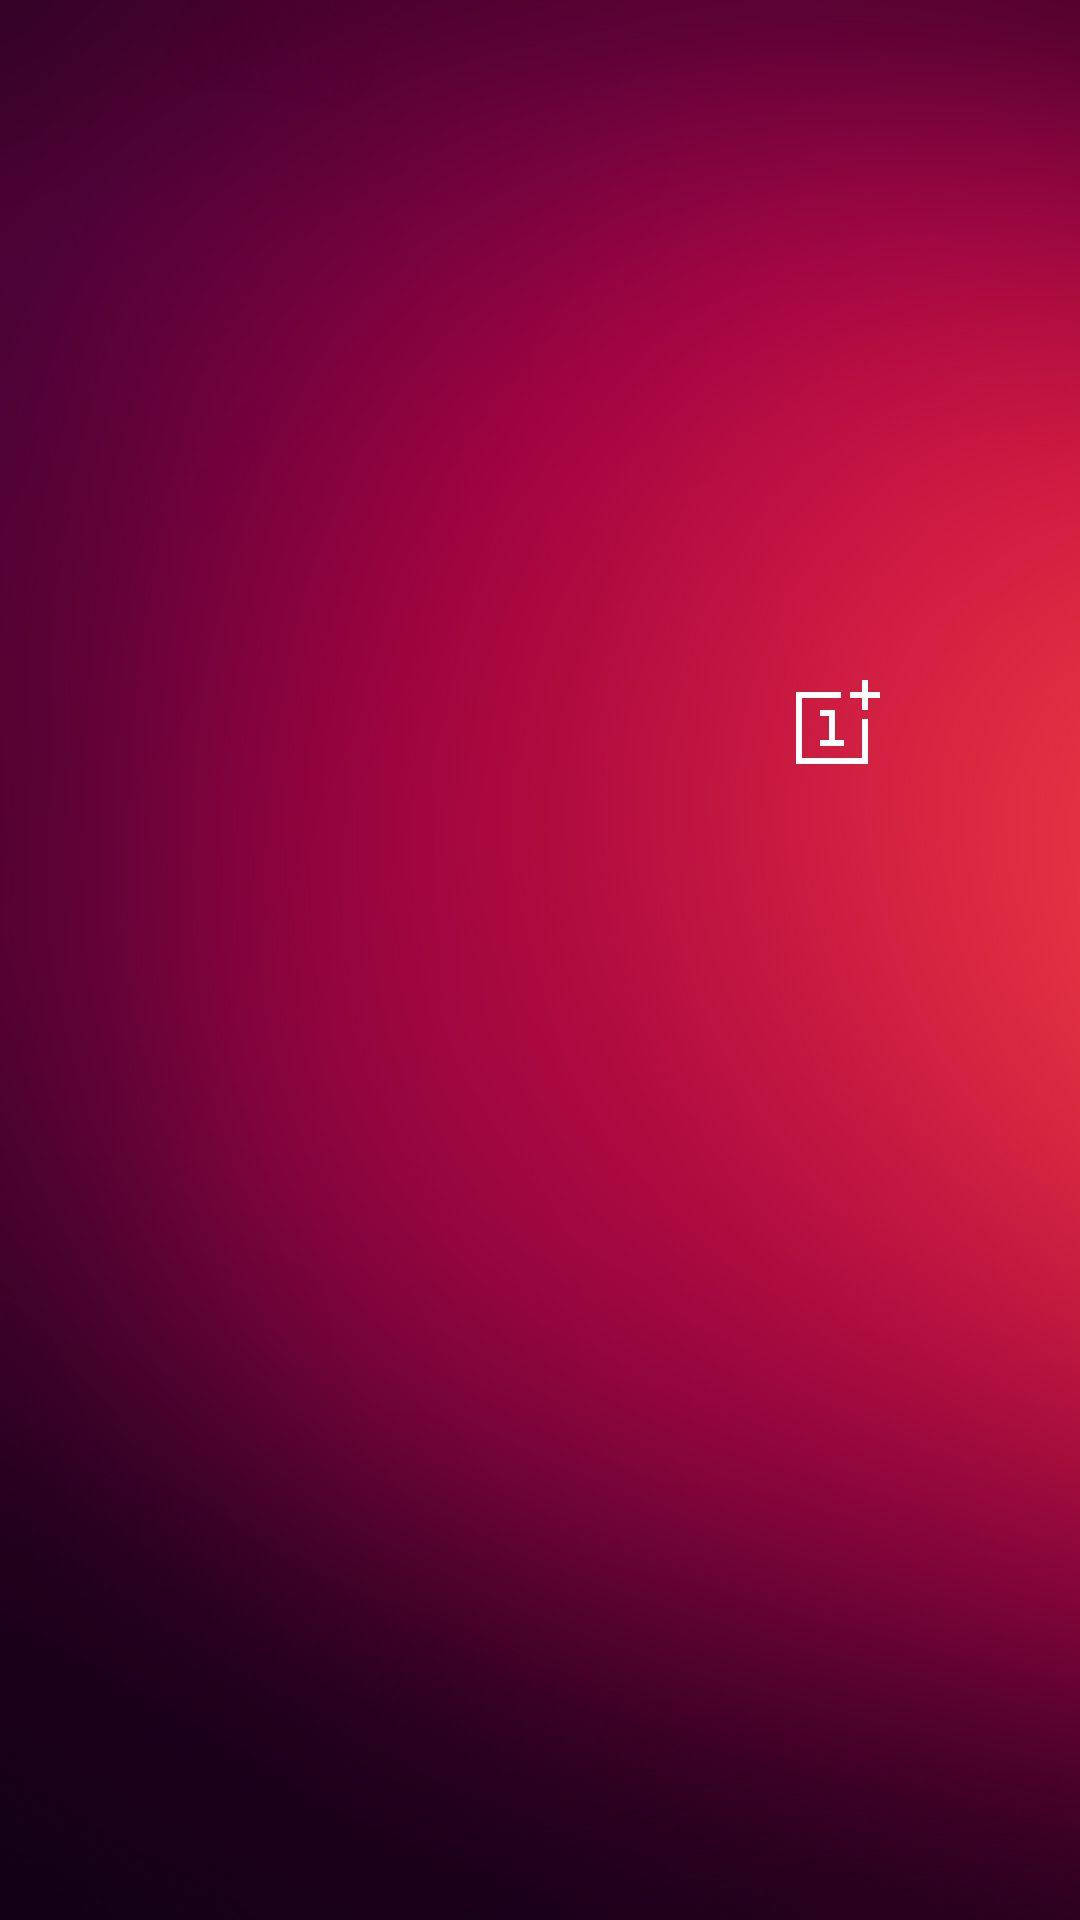 Oneplus Logo On Red